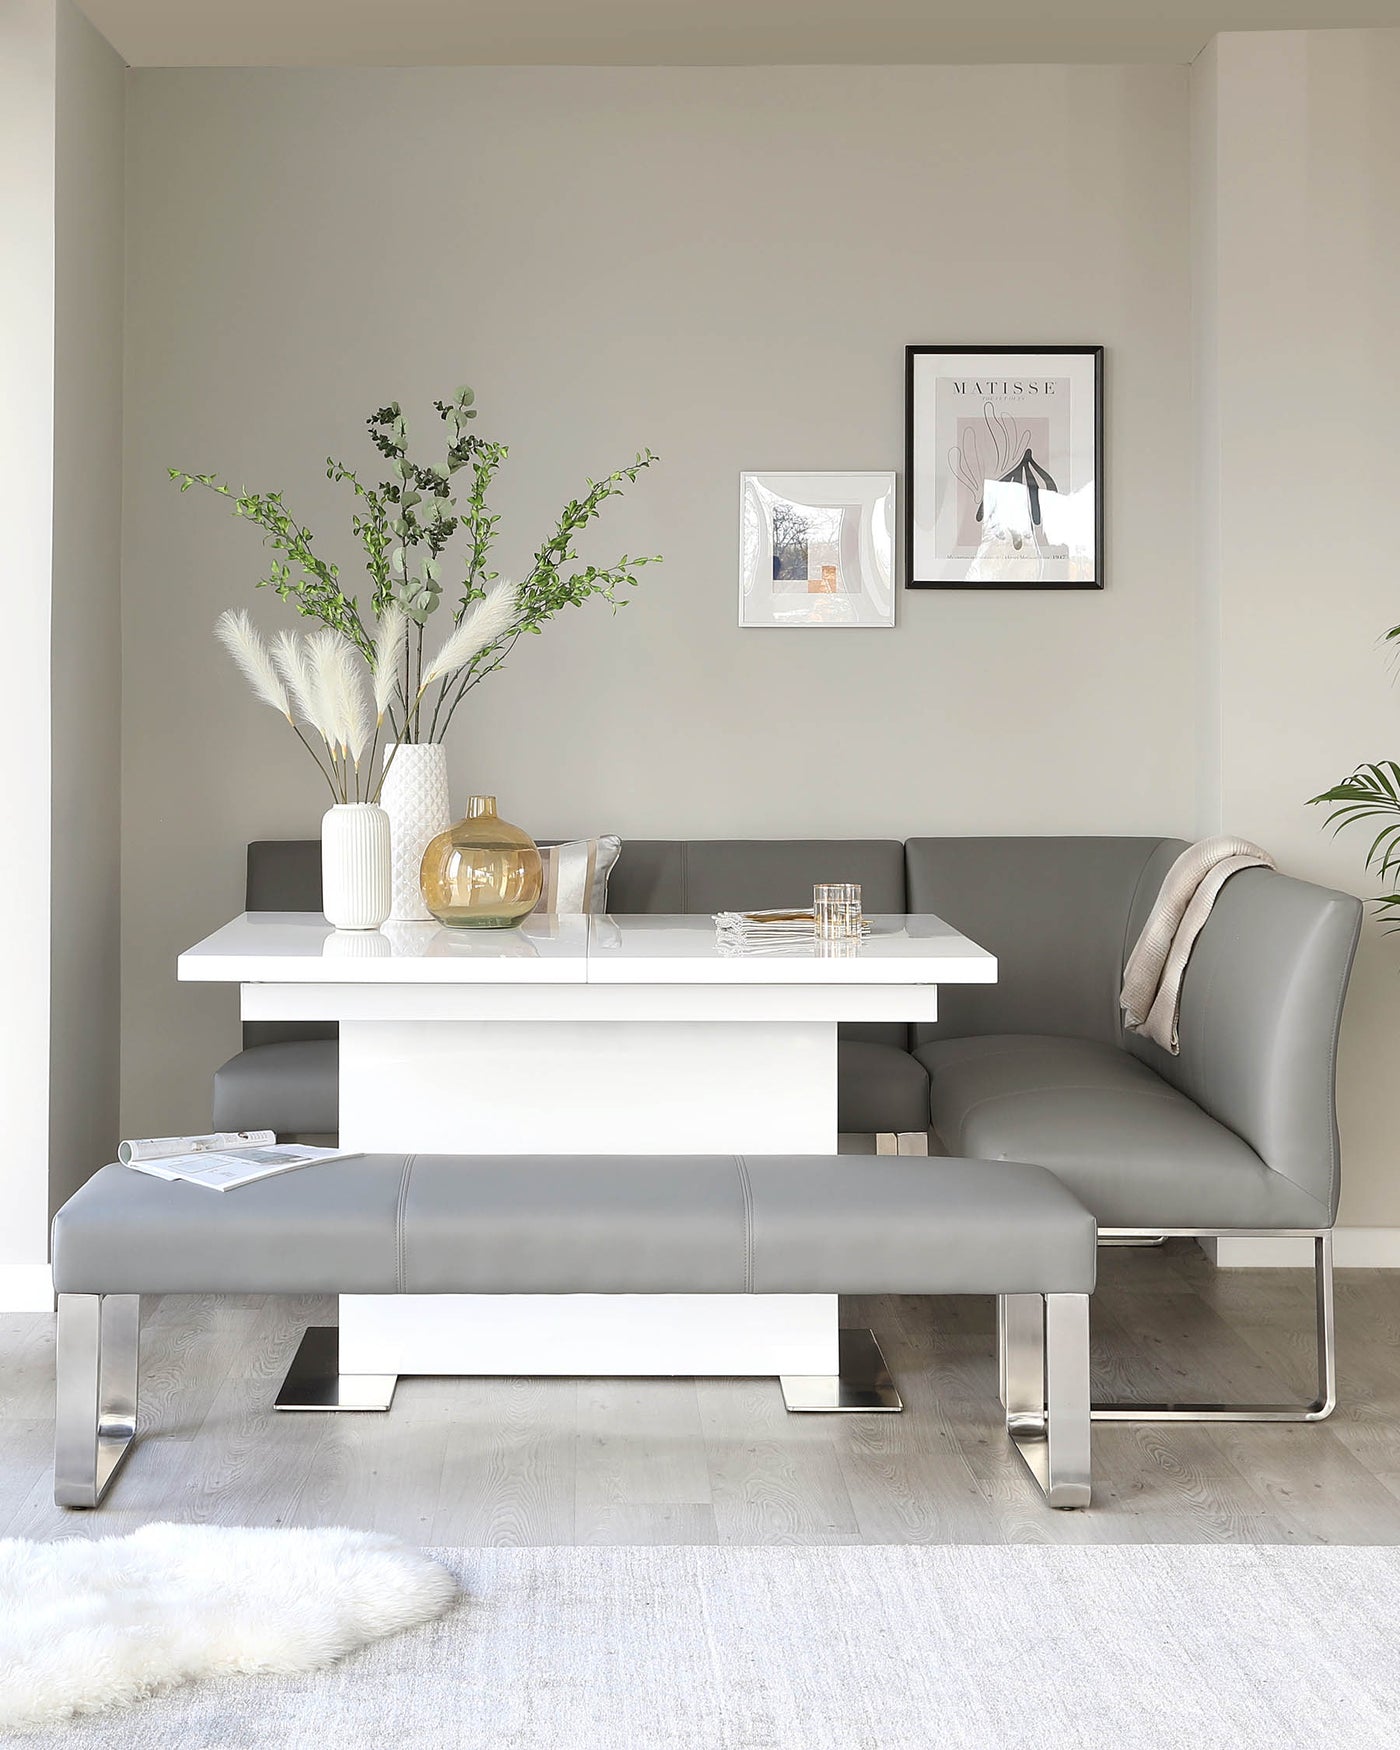 Modern minimalist furniture set in a neutral-coloured living space, featuring a sleek white rectangular dining table with a glossy finish, paired with a grey upholstered bench with chrome metal legs. The scene is accessorized with decorative elements, including greenery and art frames, creating an elegant and sophisticated ambiance.